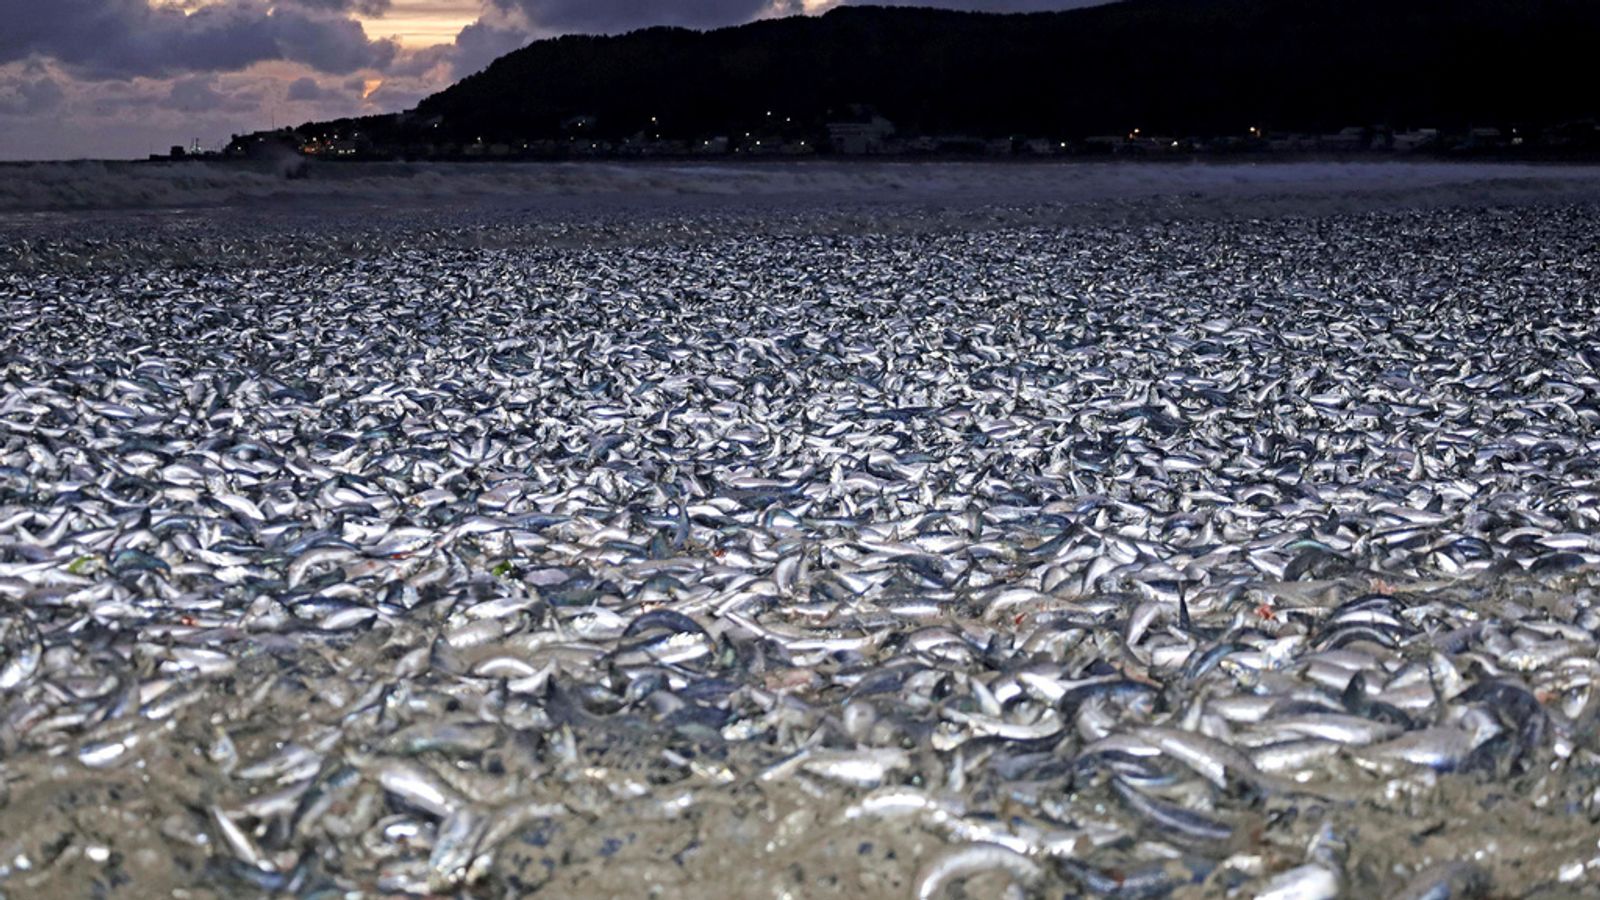 Thousands of dead fish mysteriously wash up on beach in Japan